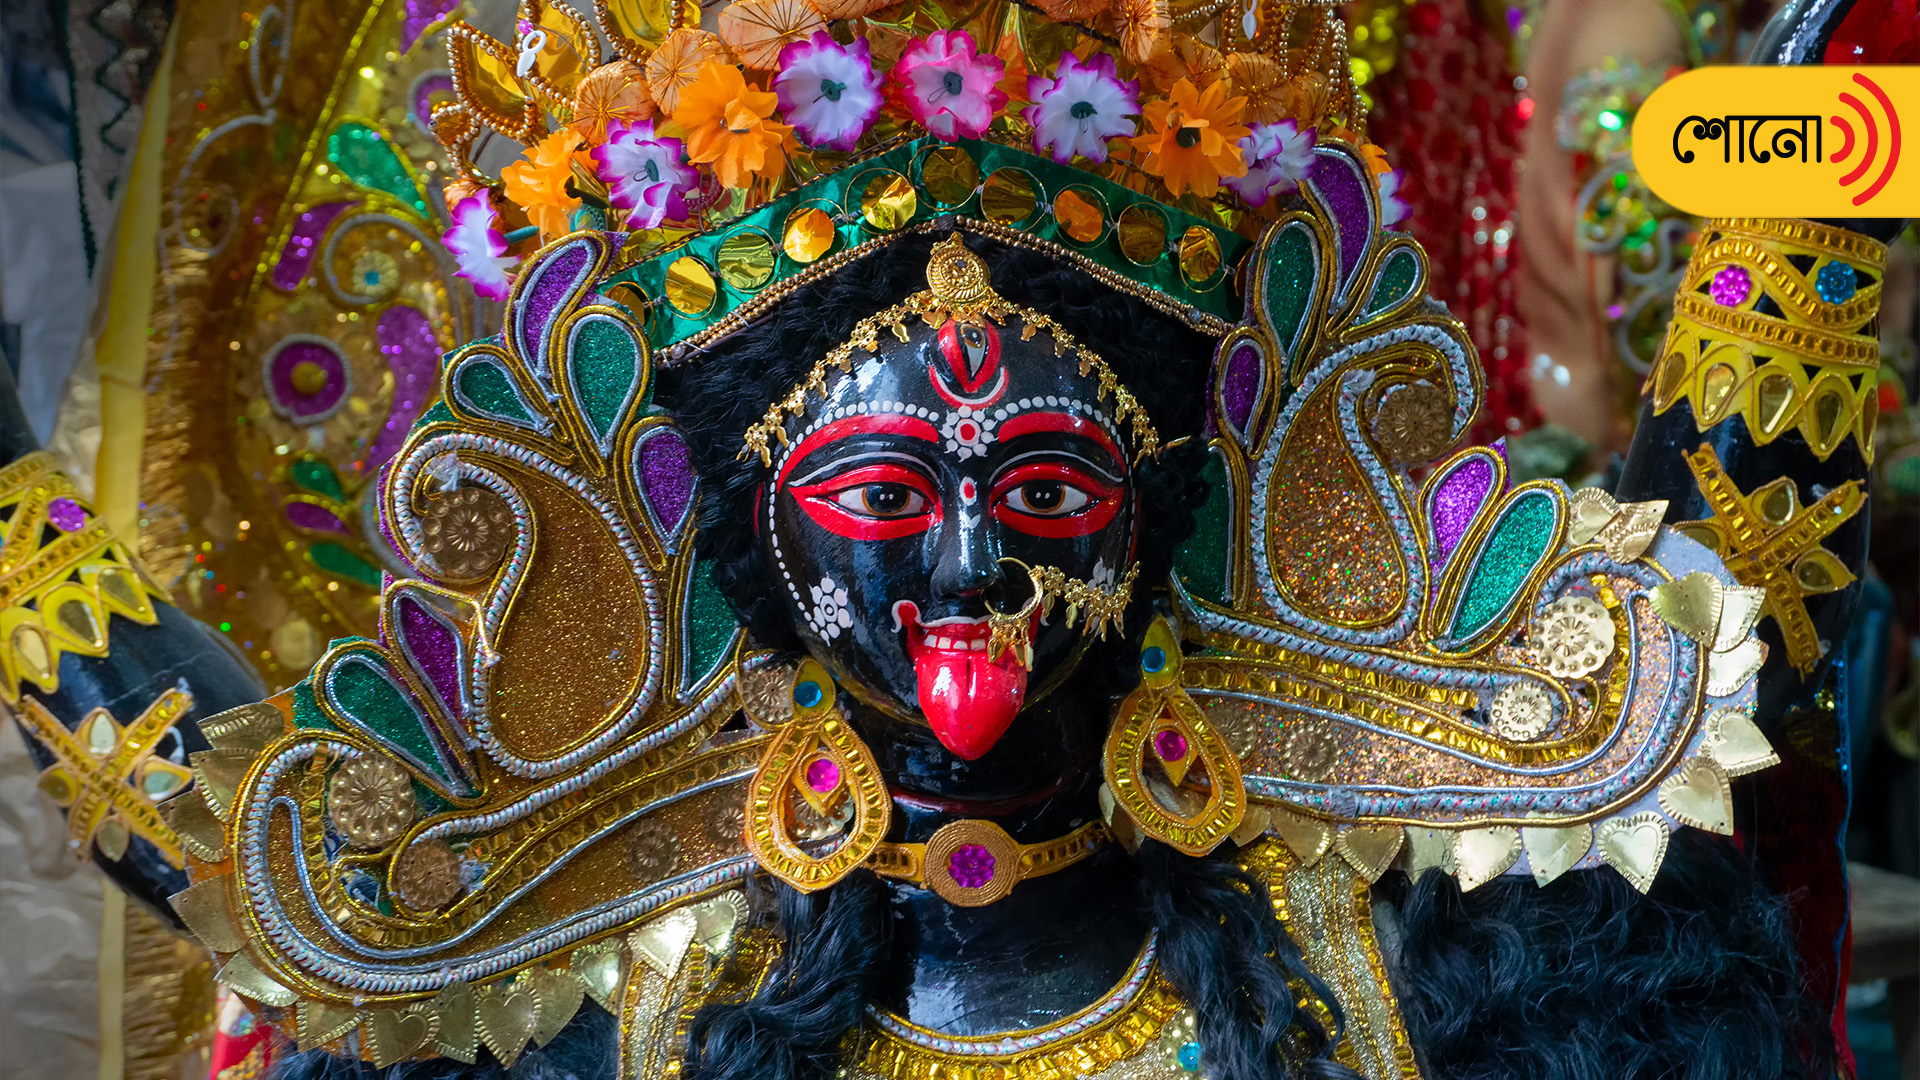 know more about devi kaali and how to worship her in home